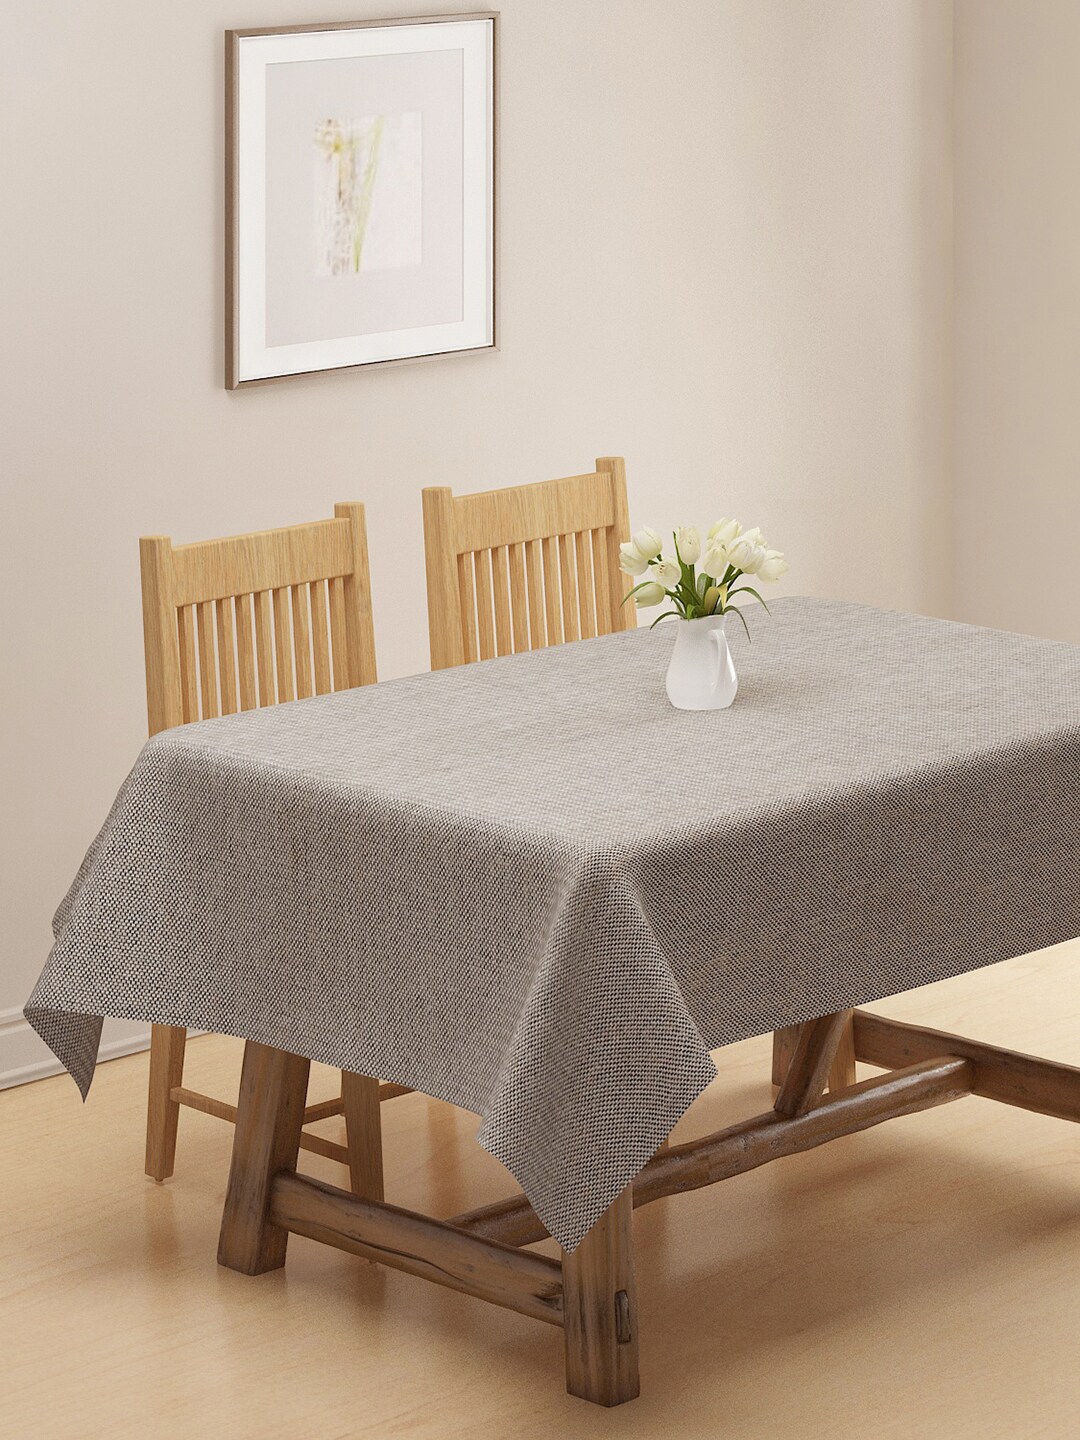 KLOTTHE Grey Solid Woven Design Cotton 6-Seater Rectangular Table Cover